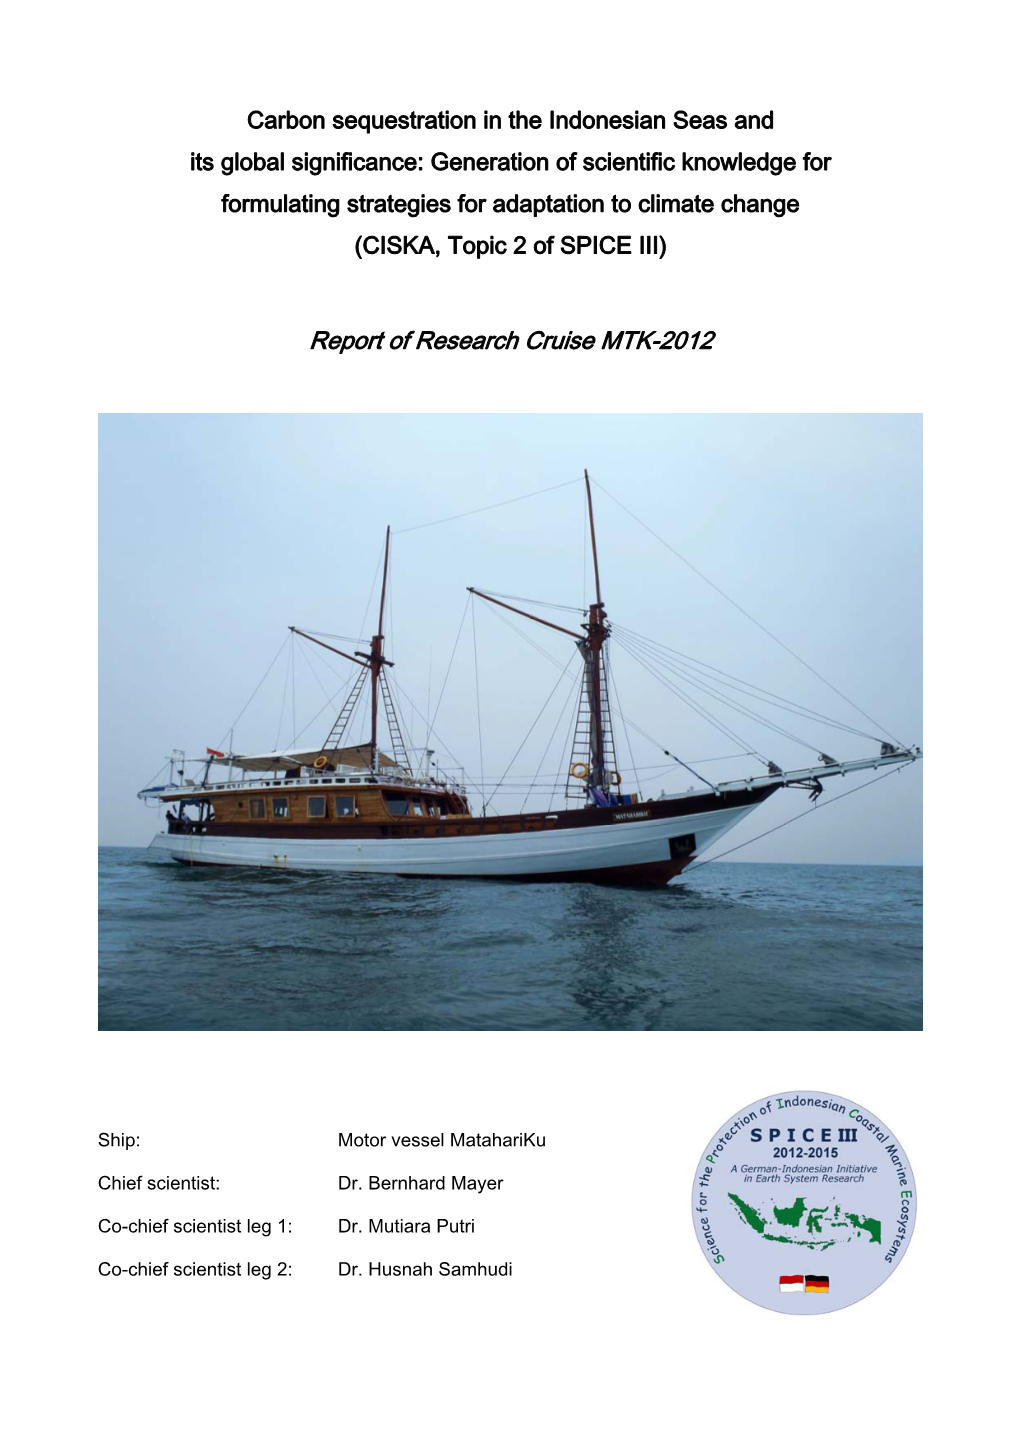 Report of Research Cruise MTK-2012